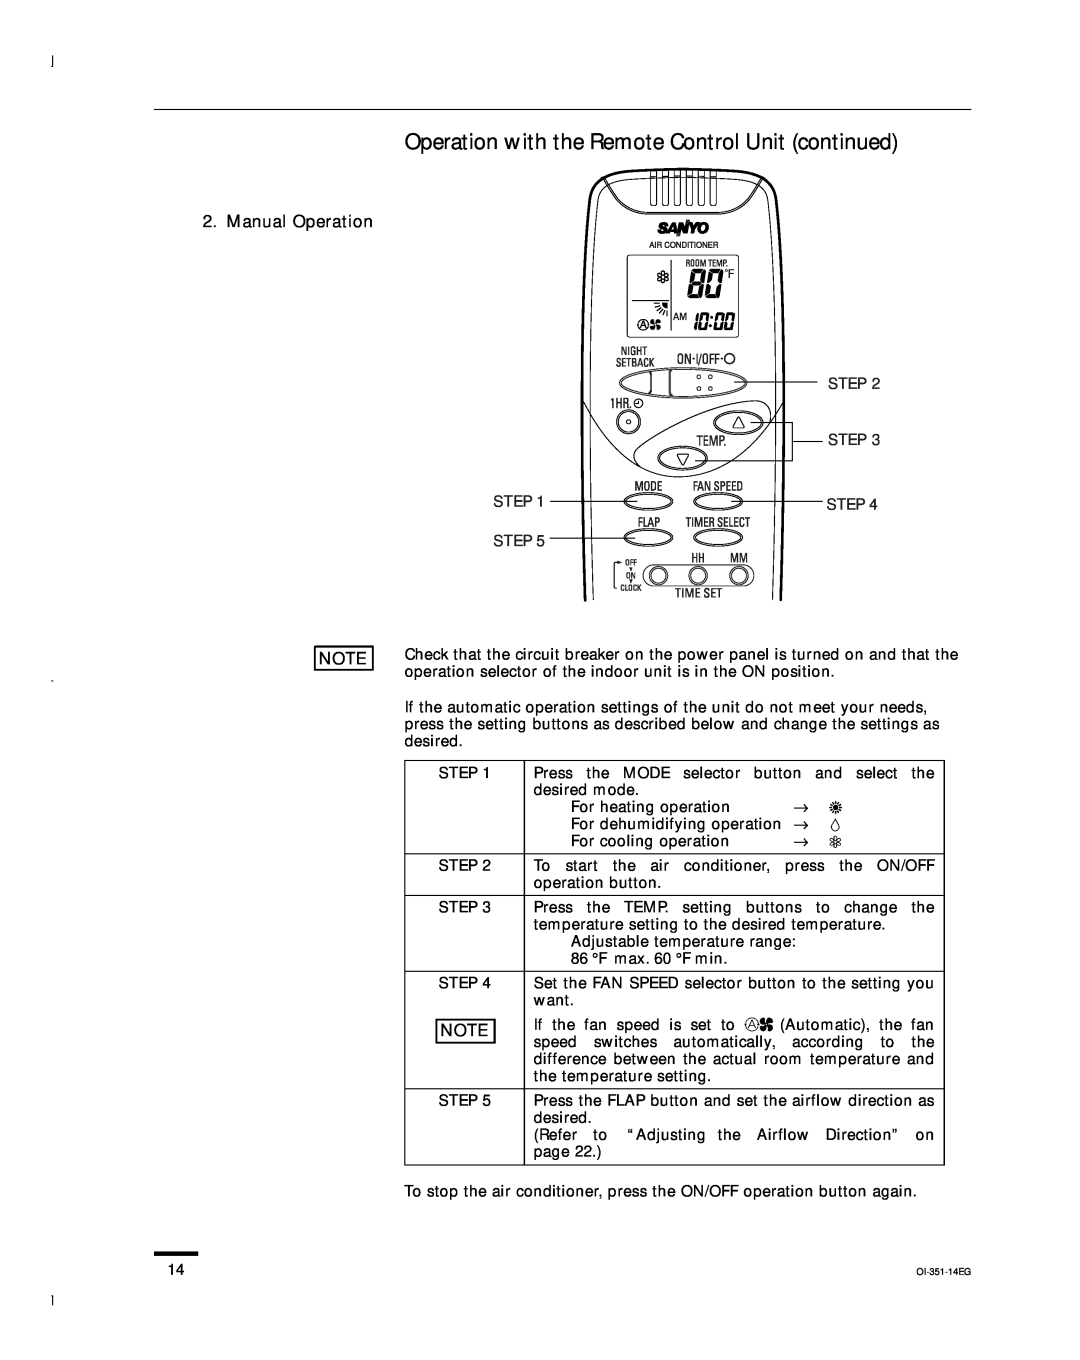 Sanyo KHS1251, KHS1852, KHS0951 instruction manual Operation with the Remote Control Unit continued, Manual Operation 